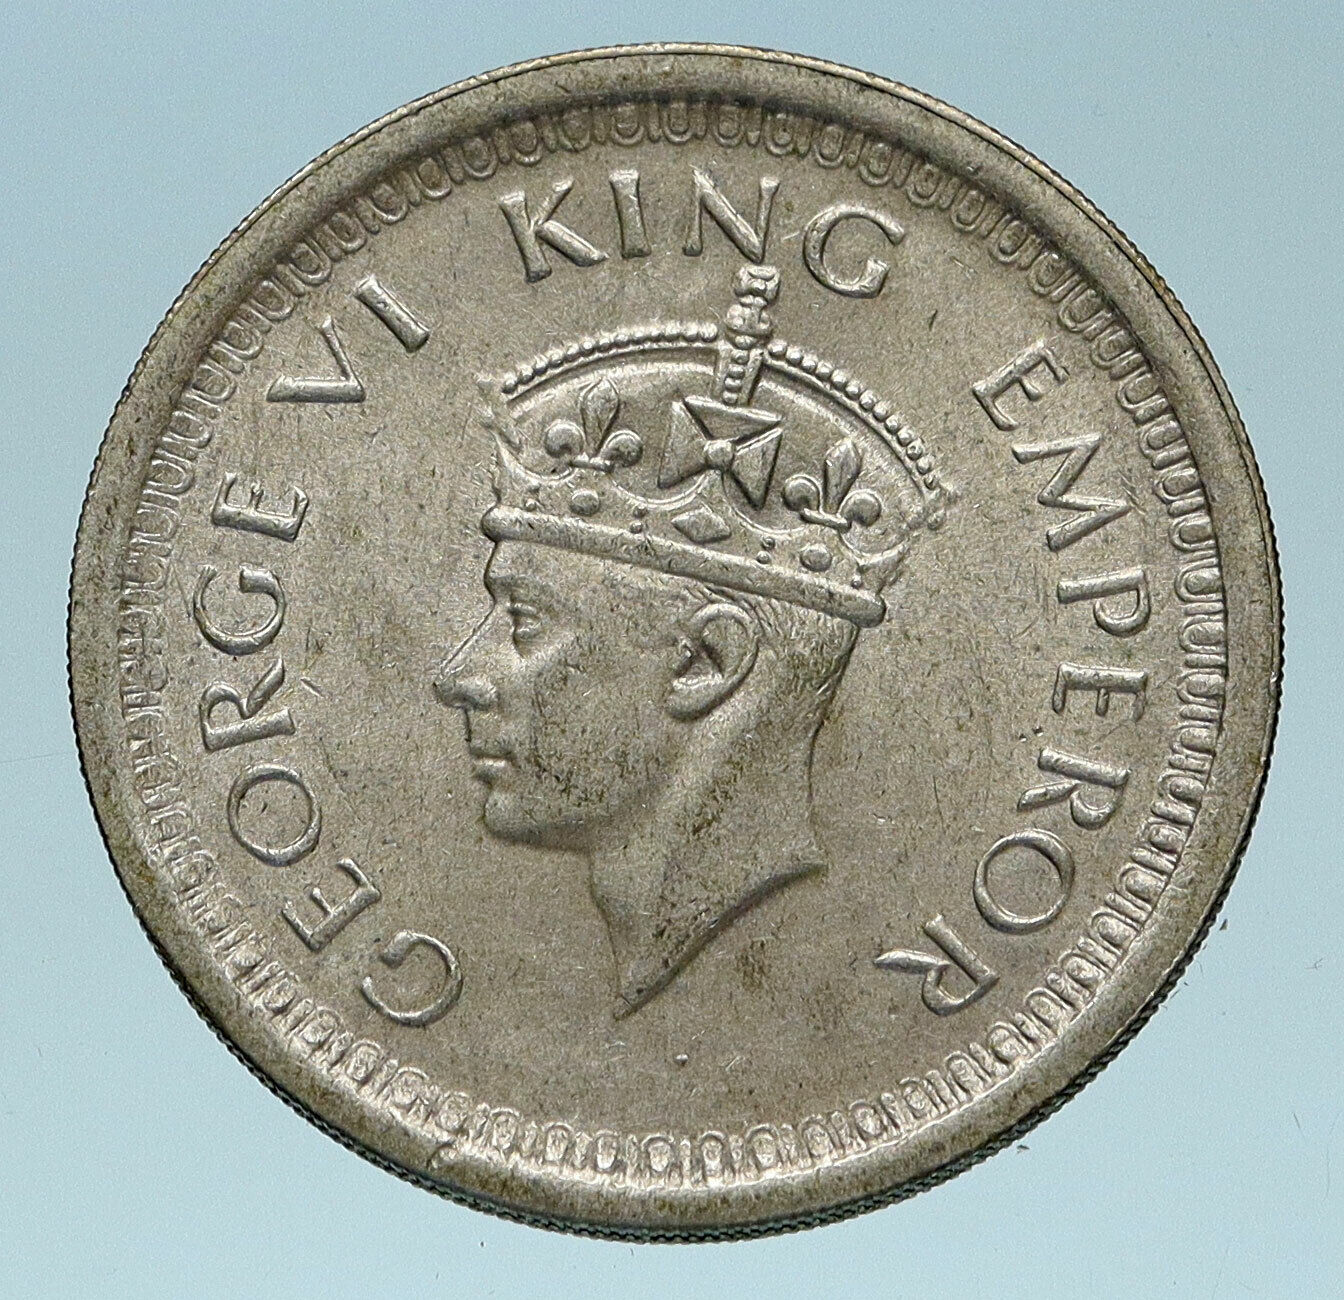 1944 INDIA UK States King George VI OLD Genuine Silver Rupee Indian Coin i83213